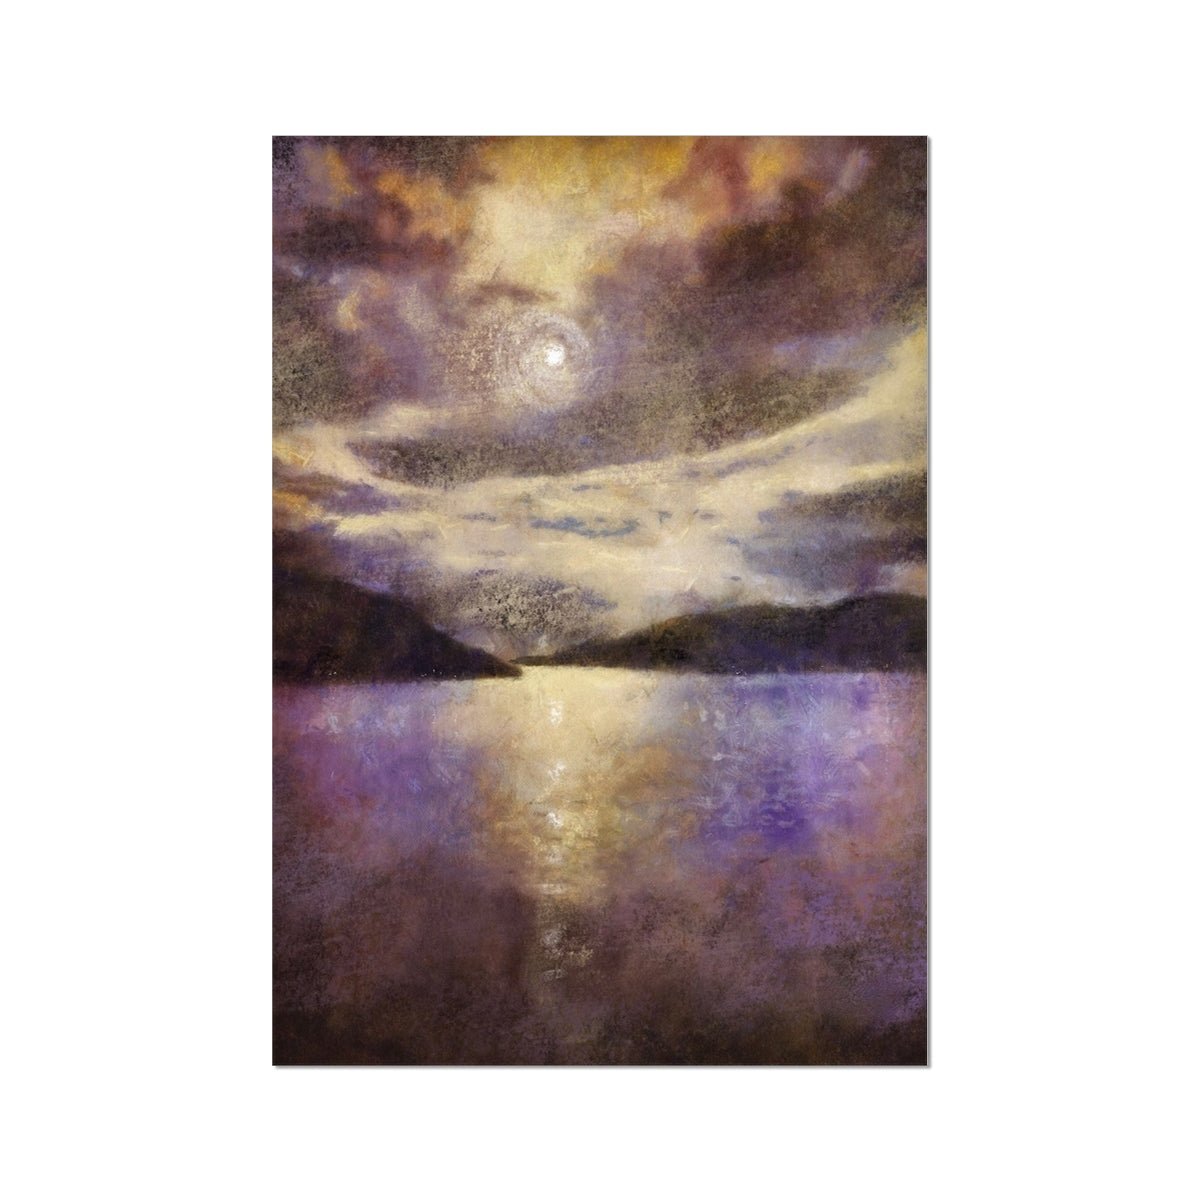 Moonlight Meets Lewis & Harris Painting | Fine Art Prints From Scotland-Unframed Prints-Hebridean Islands Art Gallery-A2 Portrait-Paintings, Prints, Homeware, Art Gifts From Scotland By Scottish Artist Kevin Hunter